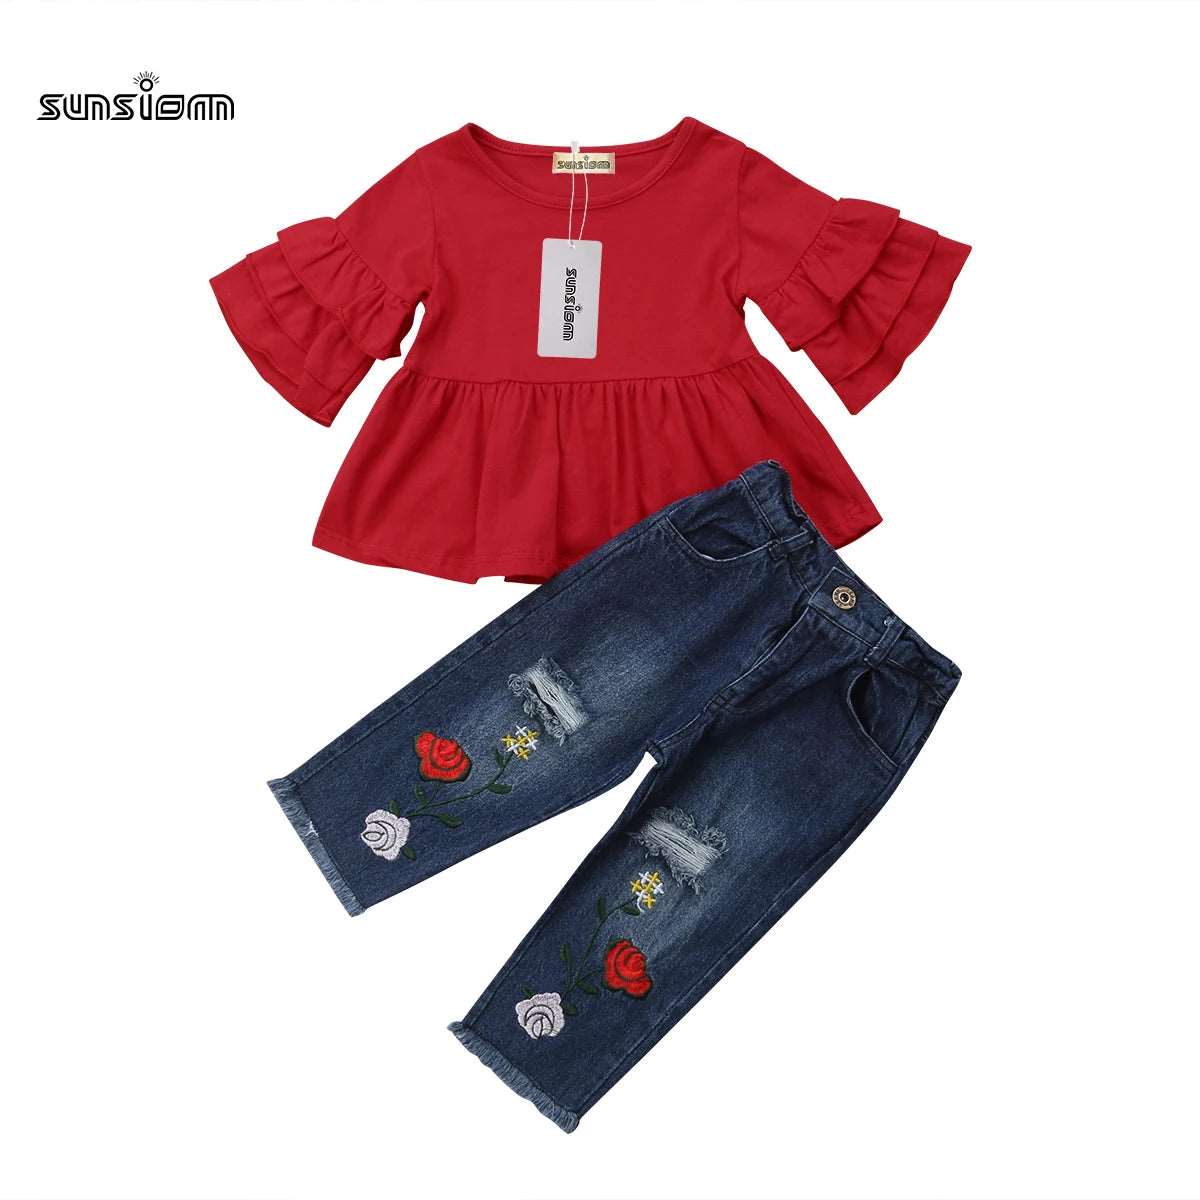 1-6Y Fashion Summer Kids Baby Clothes Sets Ruffles Sleeve Red T-Shirts Tops Floral Print Blue Hole Denim Pants Outfits